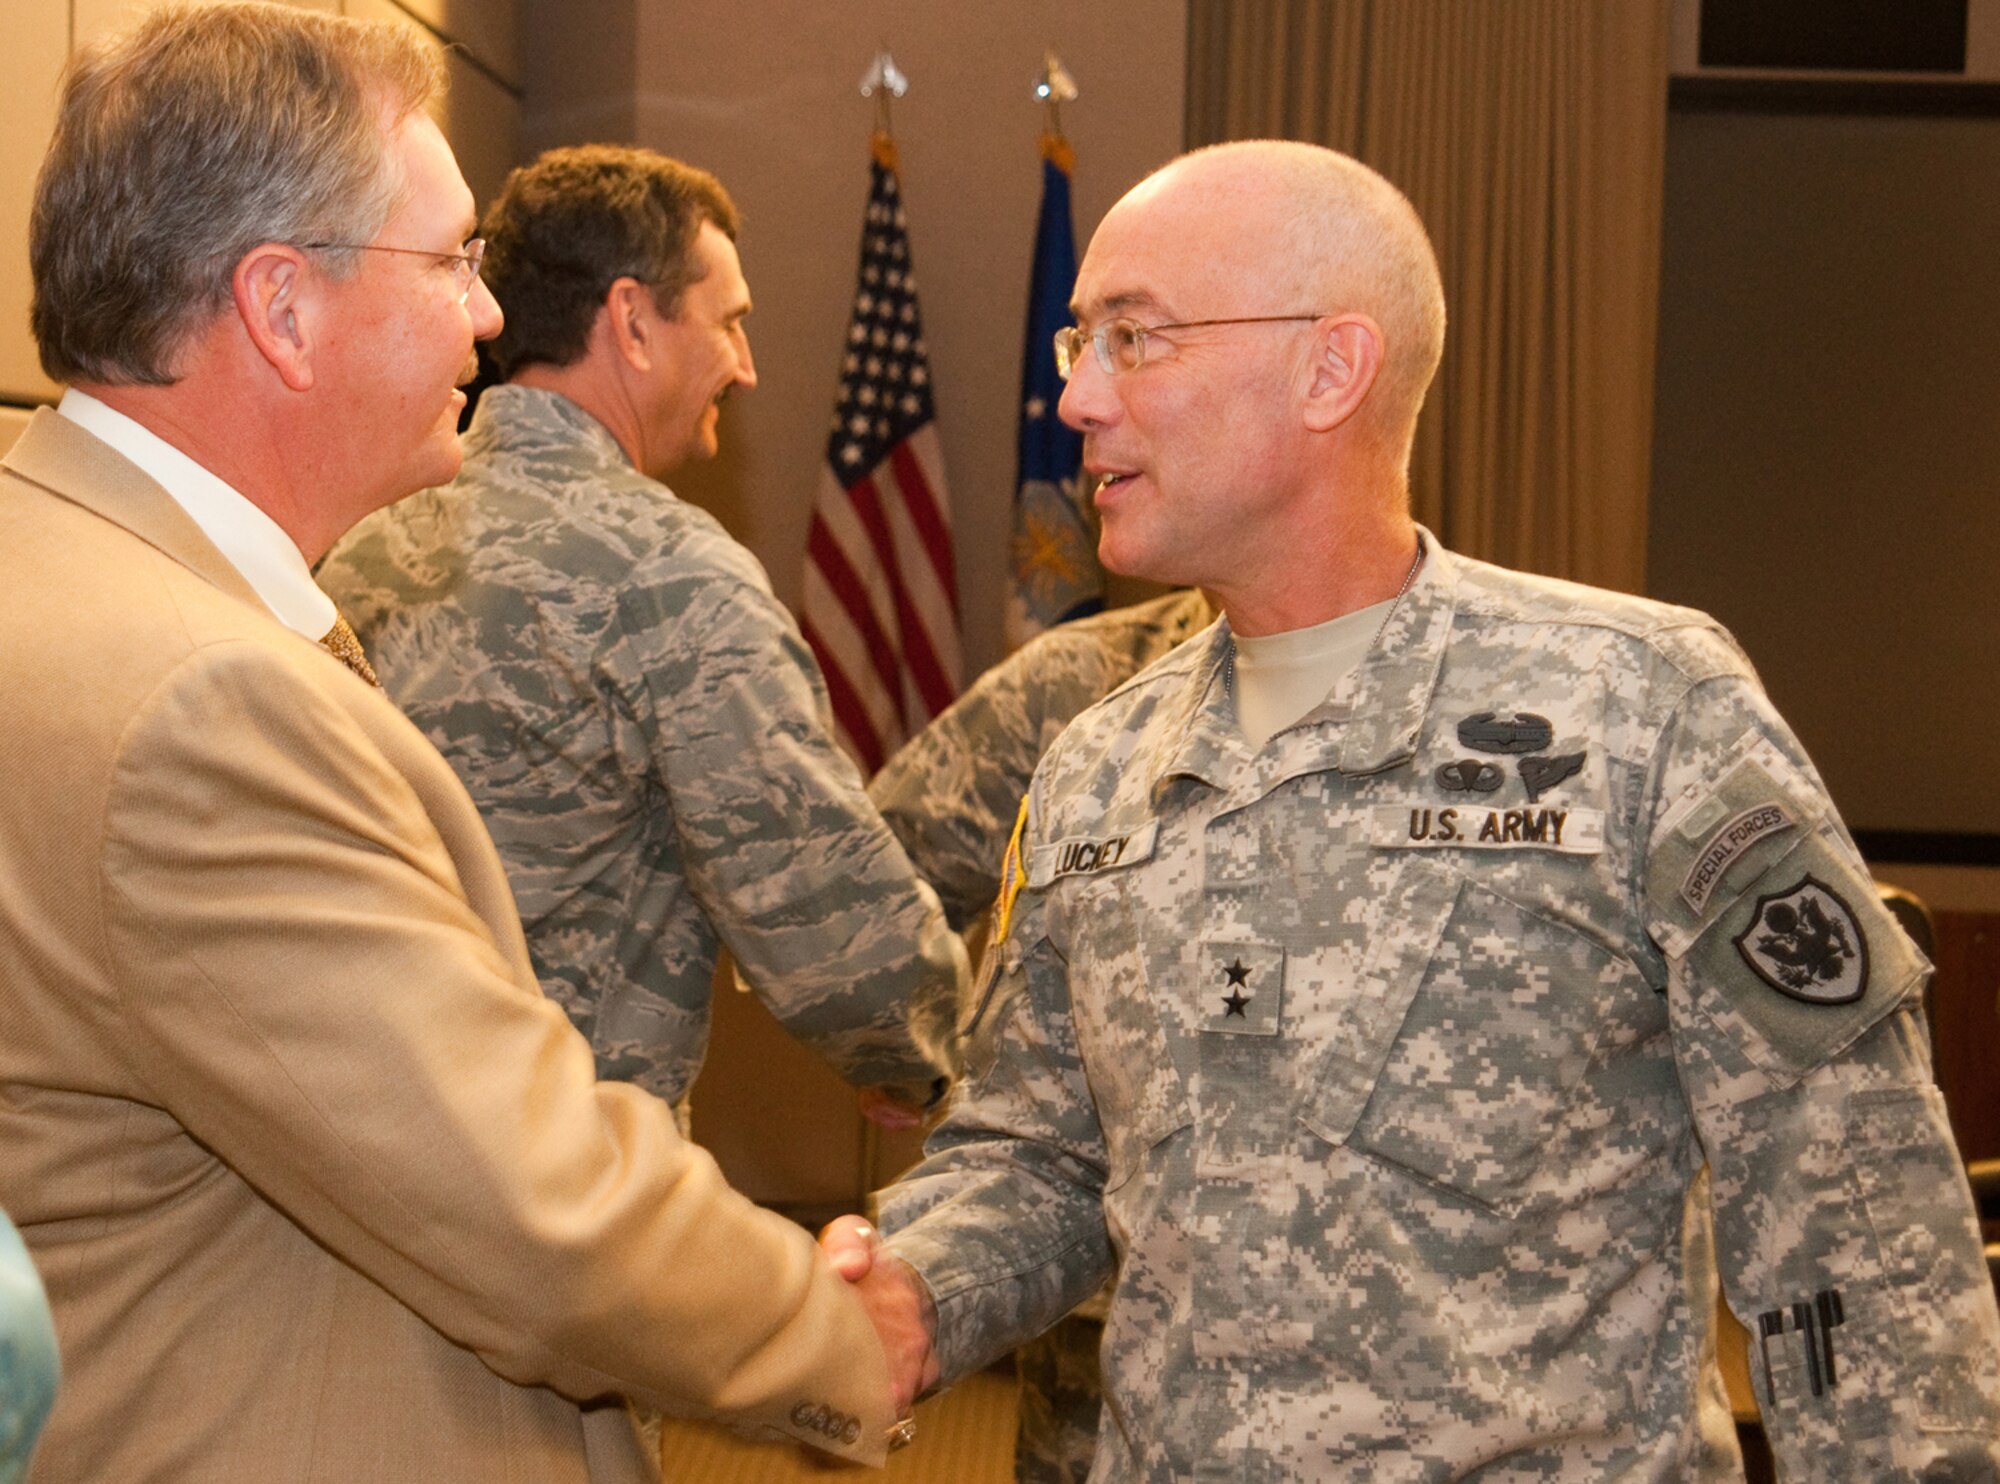 George McCanless, left, president and publisher of the Telegraph in Macon, Ga., shakes hands with Army Maj. Gen. Charles Luckey, assistant chairman to the Joint Chiefs of Staff for Reserve Matters in Washington, D.C., on Nov. 18, 2010. General Luckey co-hosted a luncheon for Mr. McCanless and other Middle Georgia employers at Headquarters Air Force Reserve Command, Robins Air Force Base, Ga. (U.S. Air Force photo/Staff Sgt. Alexy Saltekoff)